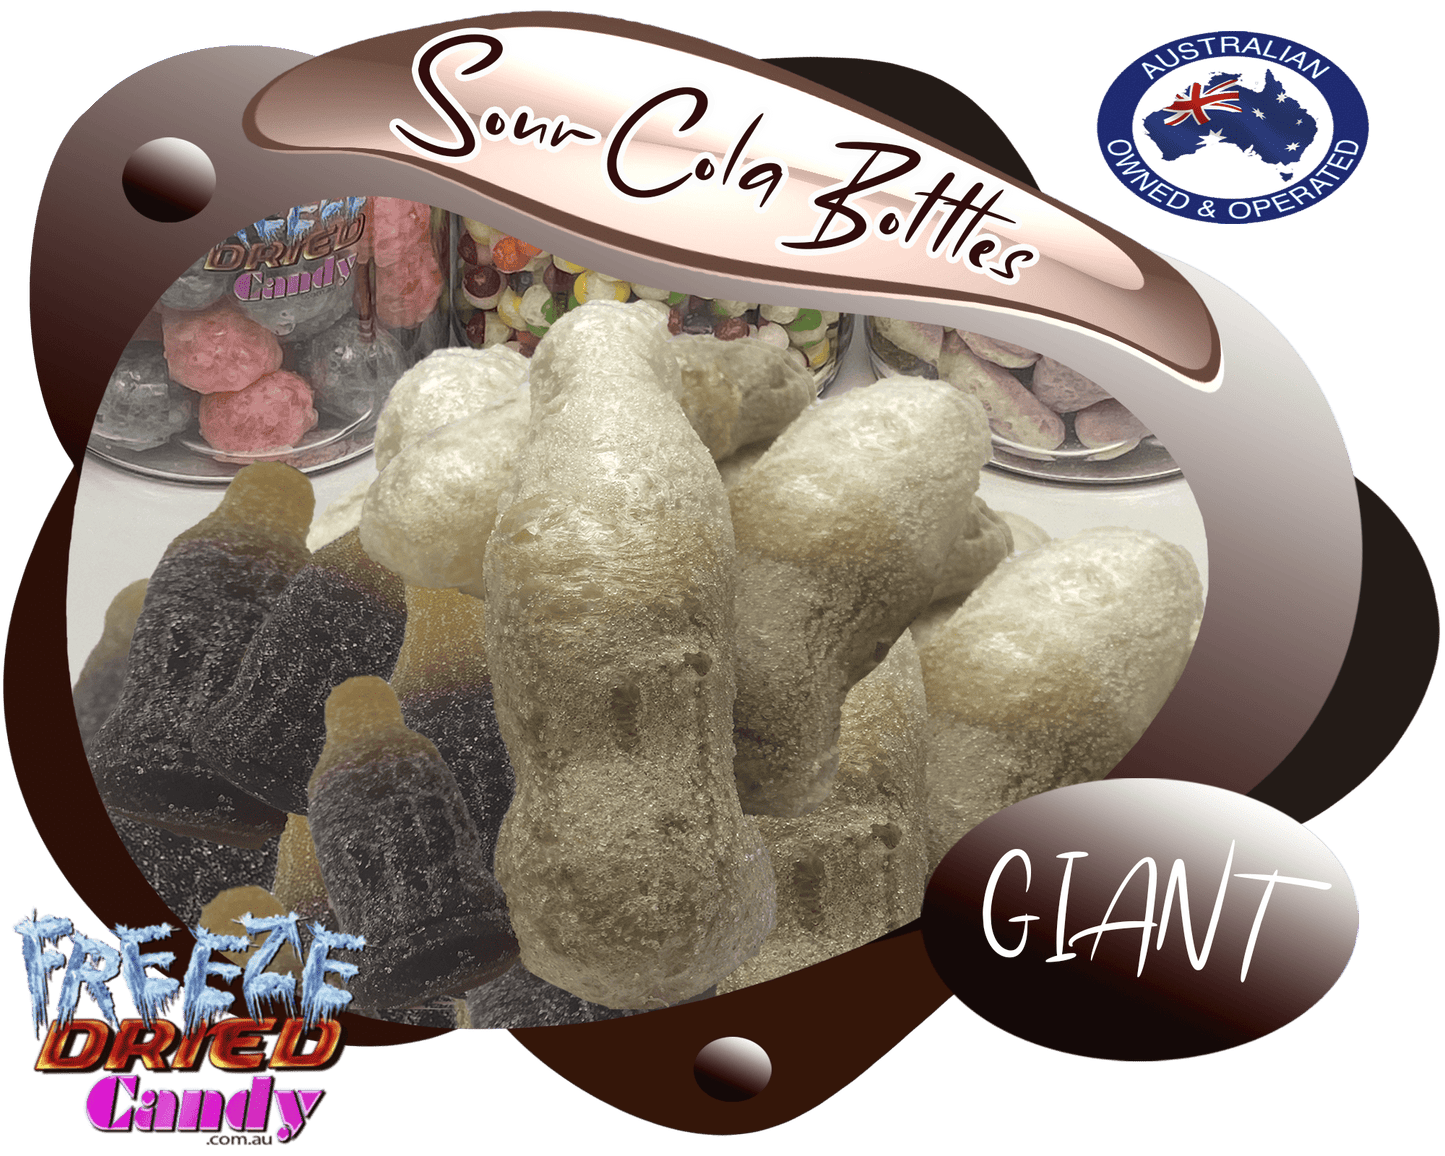 Freeze Dried Sour Cola Bottles - GAINT - Freeze Dried Candy Lollies